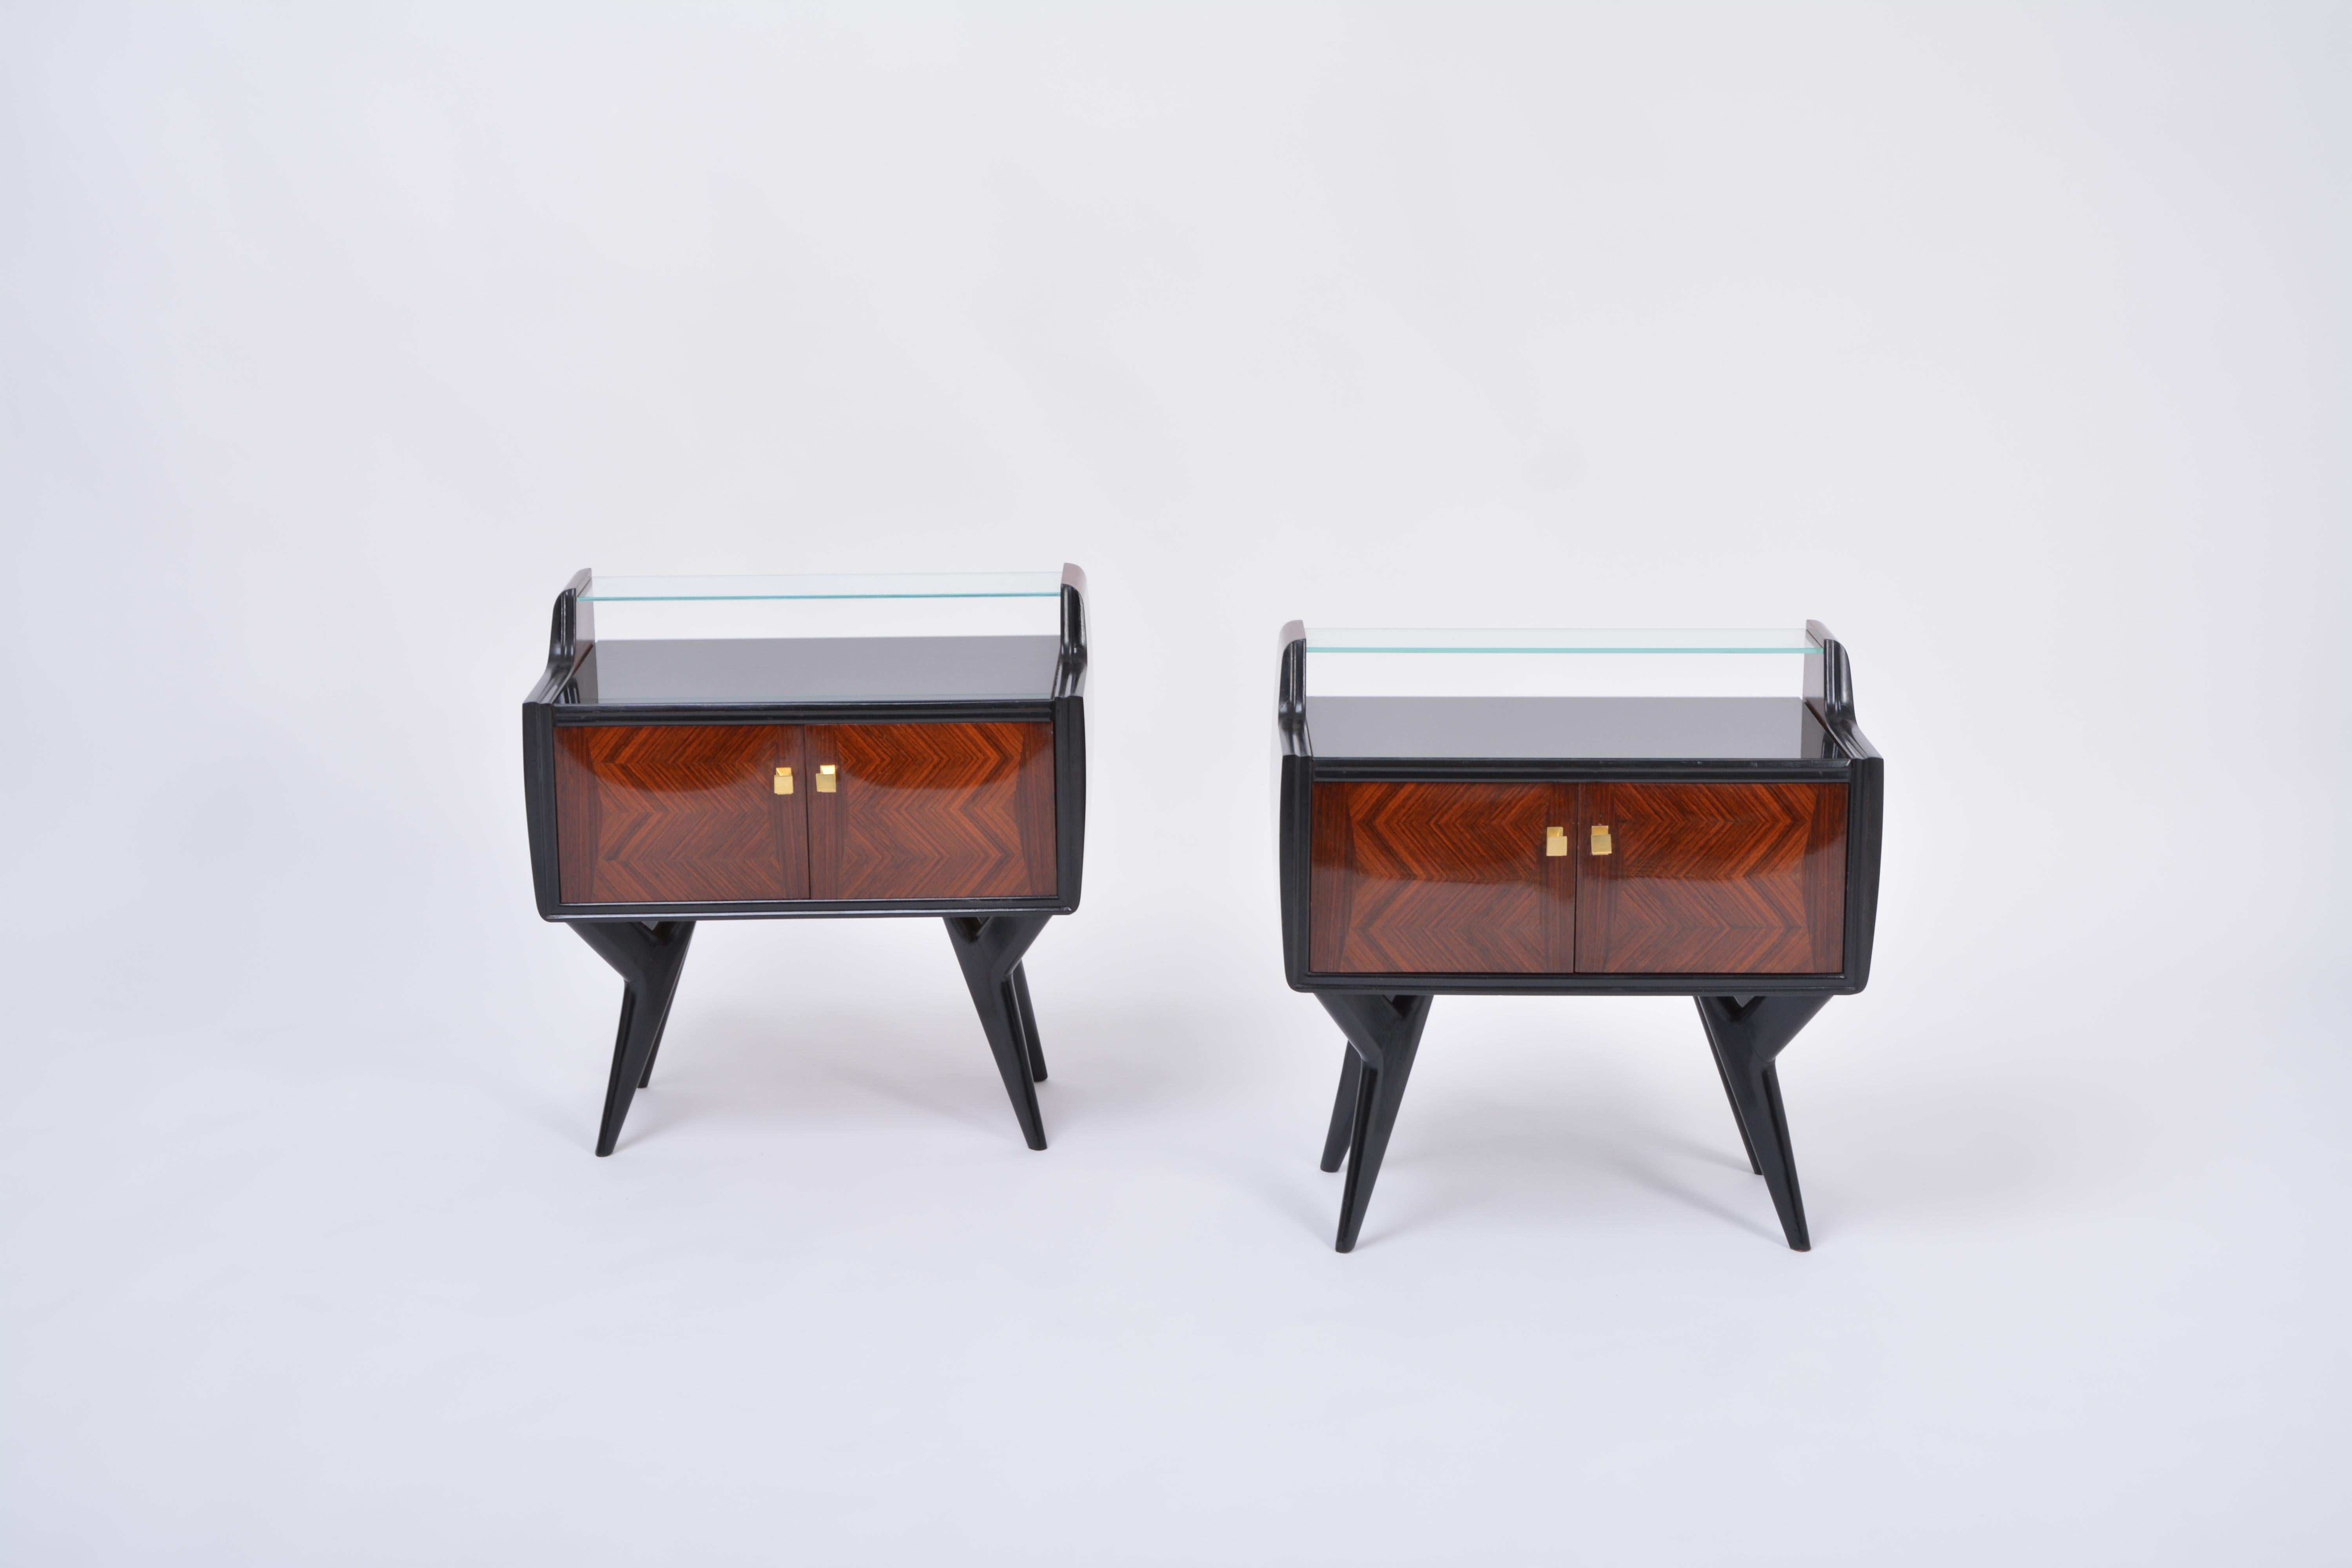 Pair of Italian midcentury nightstands with sculptural base
This pair of nightstands was produced in Italy in the 1950s an is similar to the style of Vittorio Dassi. Each nightstand has one compartment hidden behind a pair of doors. The doors have